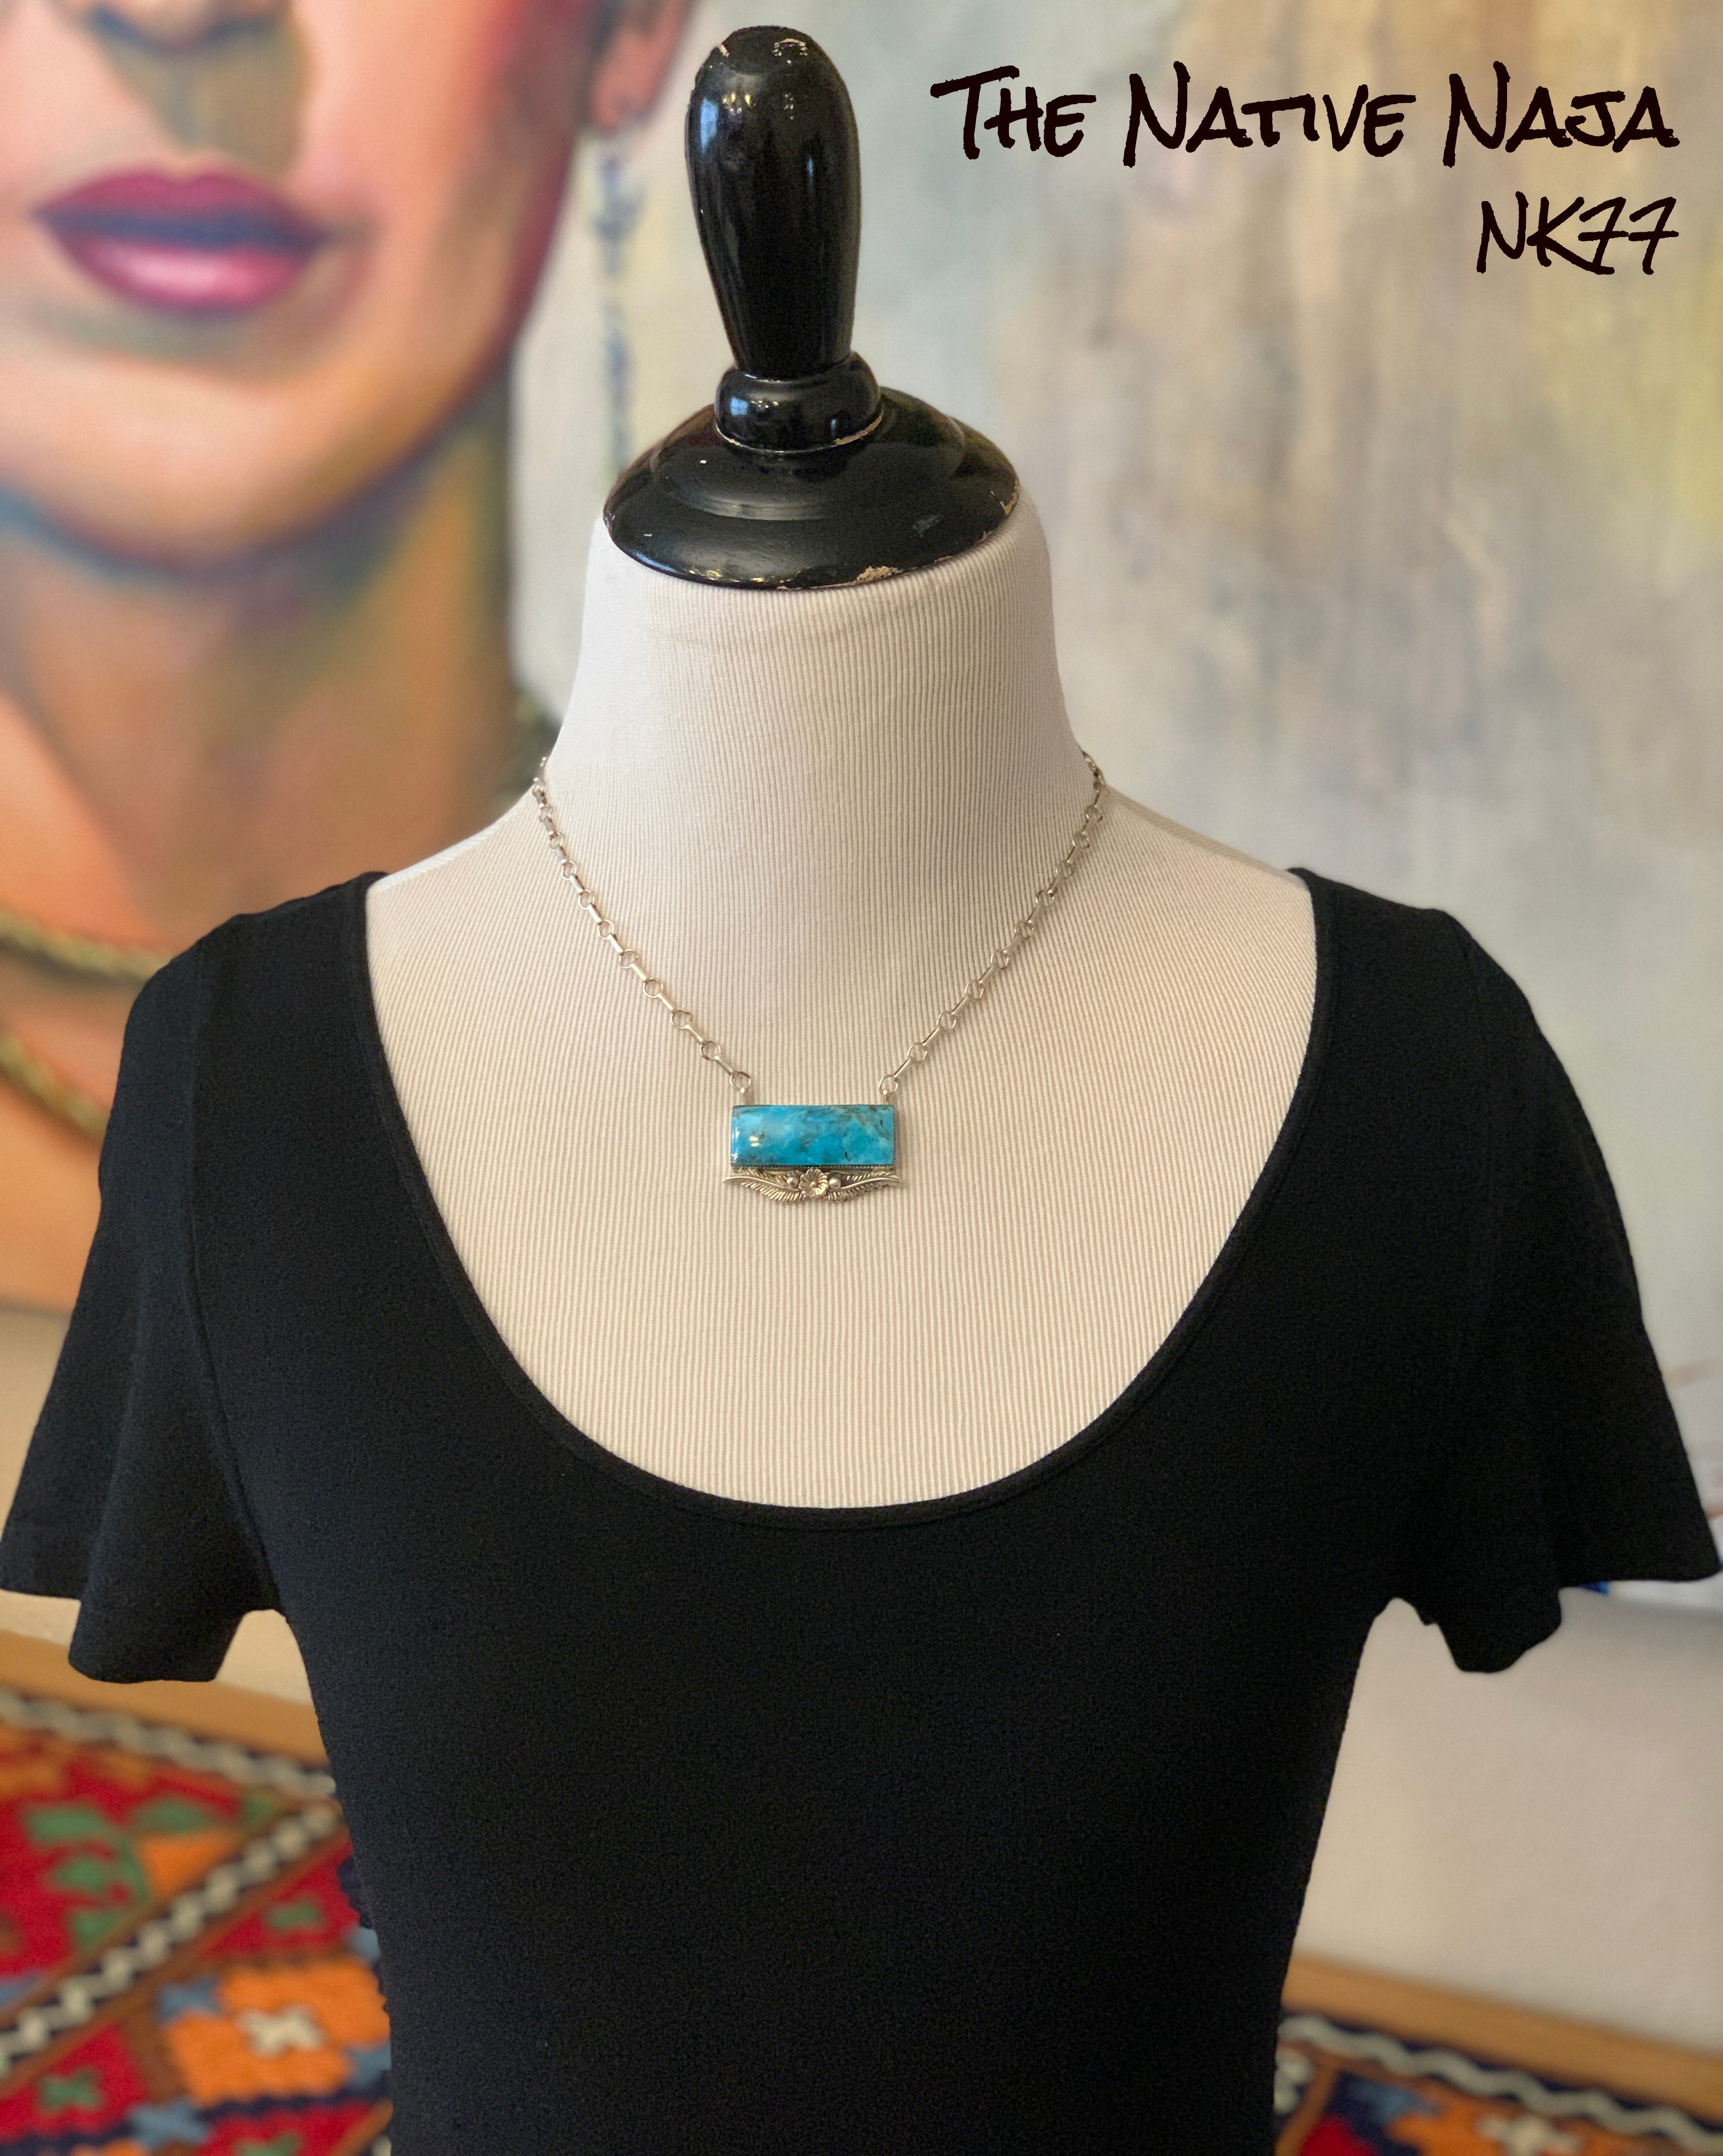 Navajo Gregg Yazzie 16" Sterling Silver & Kingman Turquoise Bar Necklace NK77